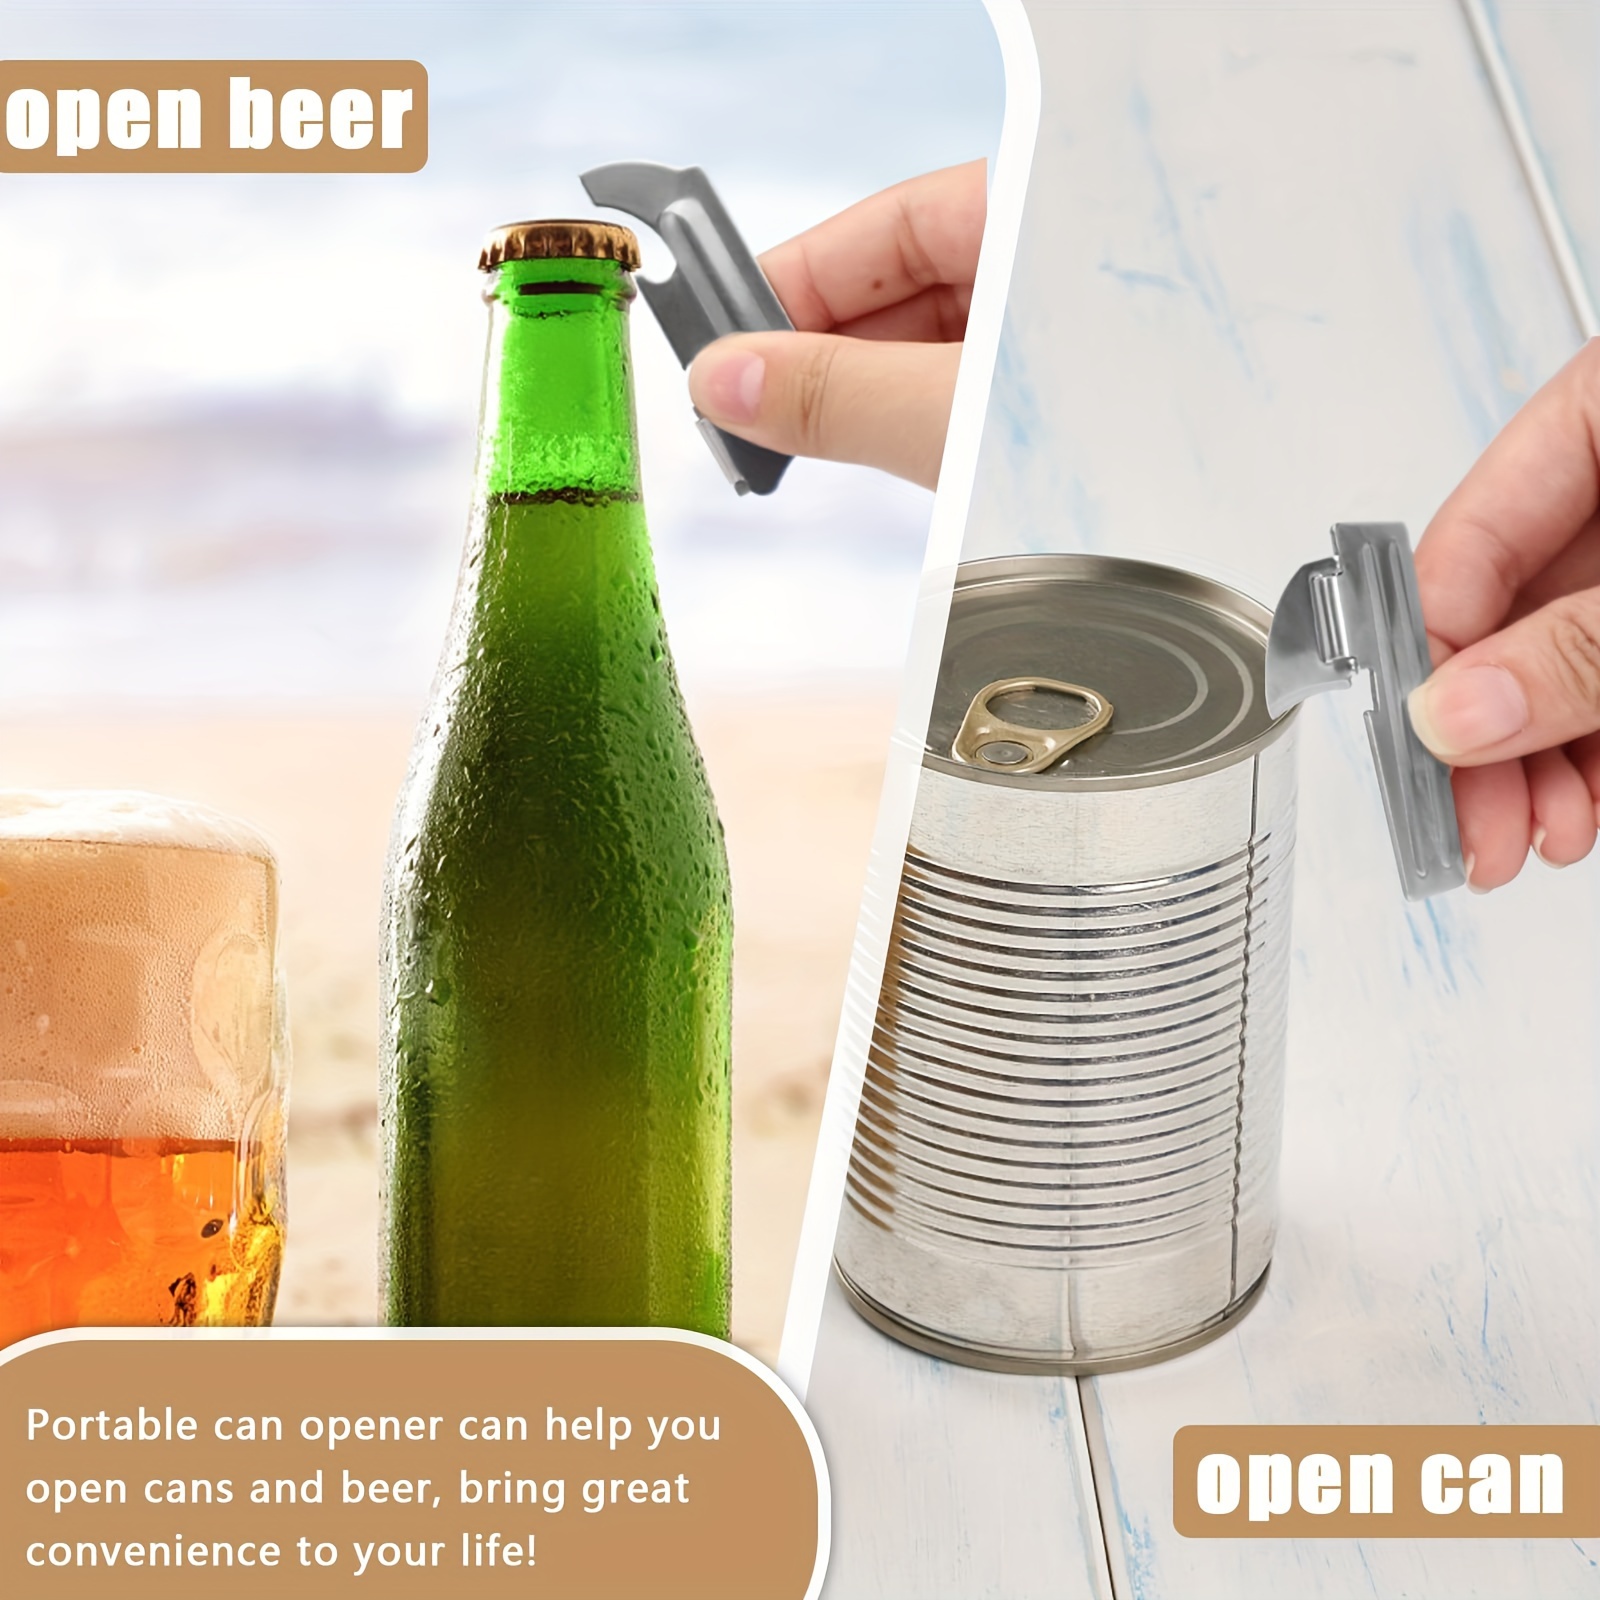 12pcs military style can openers camping can openers p 38 p 51 and p 57 stainless steel can opener powerful can opener multifunctional beer bottle opener for seniors weak hands manual can opener for home kitchen restaurant kitchen gadgets